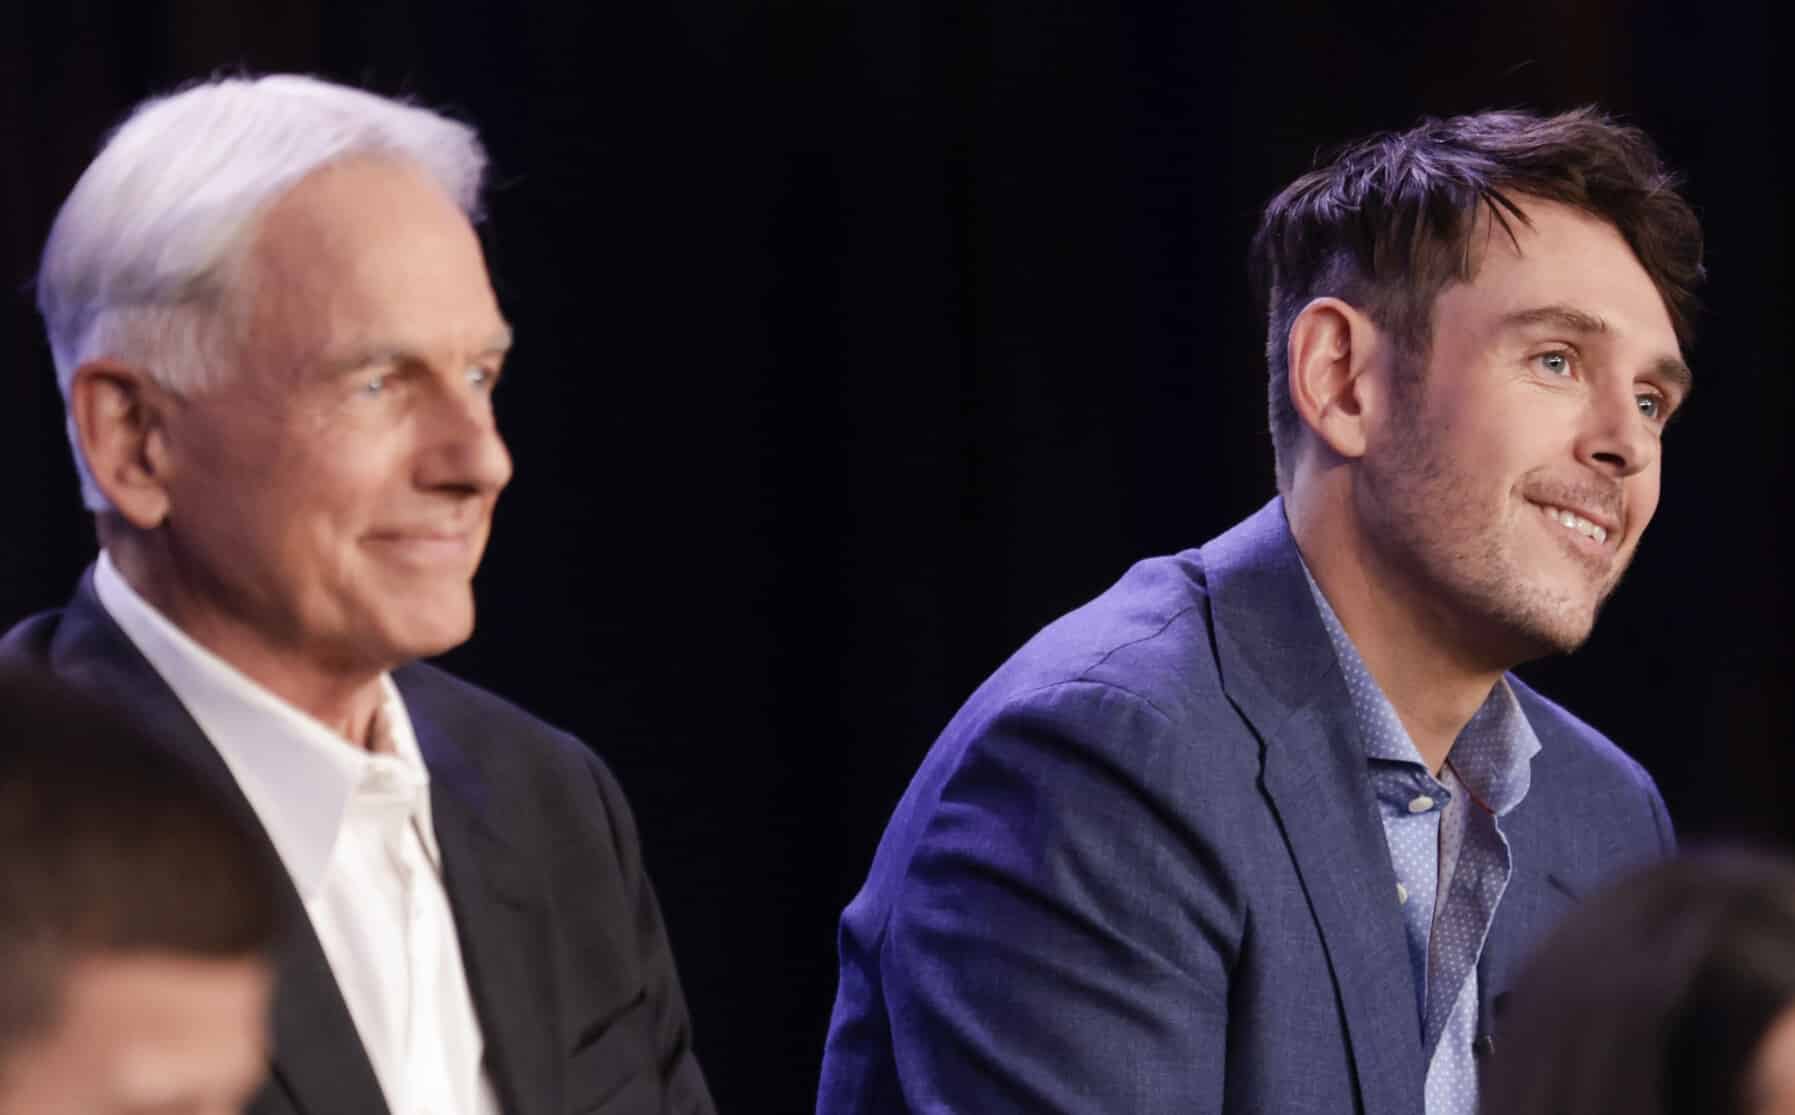 L-R) Mark Harmon, Executive Producer and Narrator, Sean Harmon, Executive Producer of the CBS series NCIS: Origins at the TCA SUMMER PRESS TOUR 2024 on Saturday, July 13, 2024 at the Langham Huntington Hotel in Pasadena, CA. Photo: Francis Specker/CBS ©2024 CBS Broadcasting, Inc. All Rights Reserved